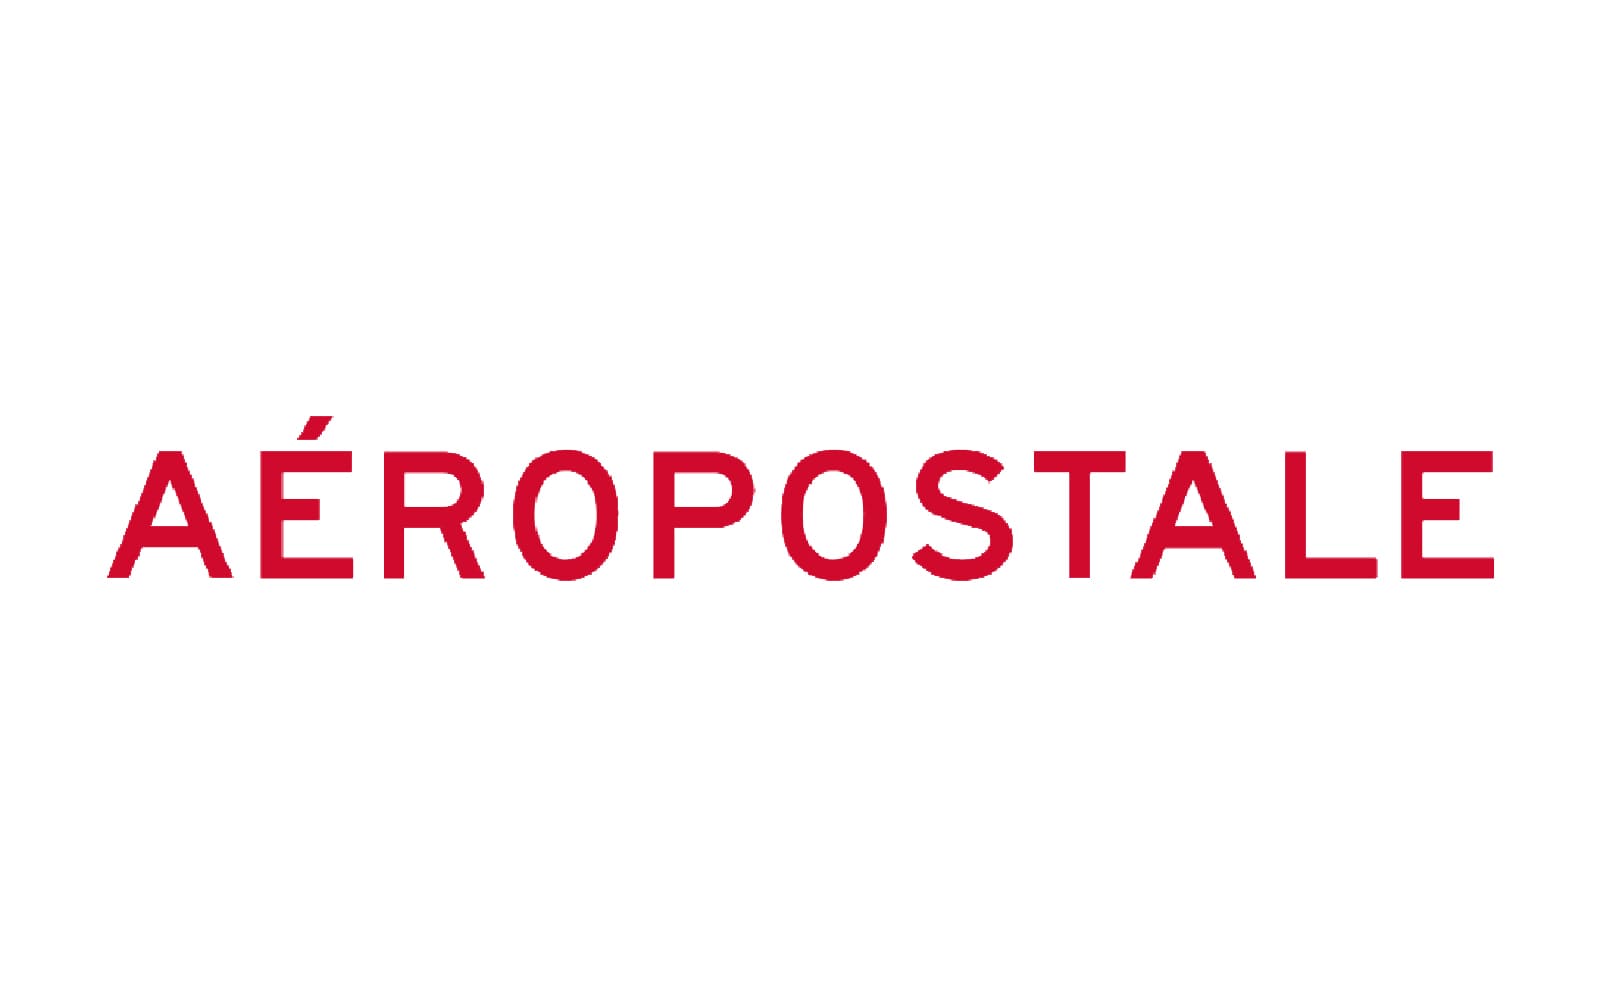 The History of Aeropostale